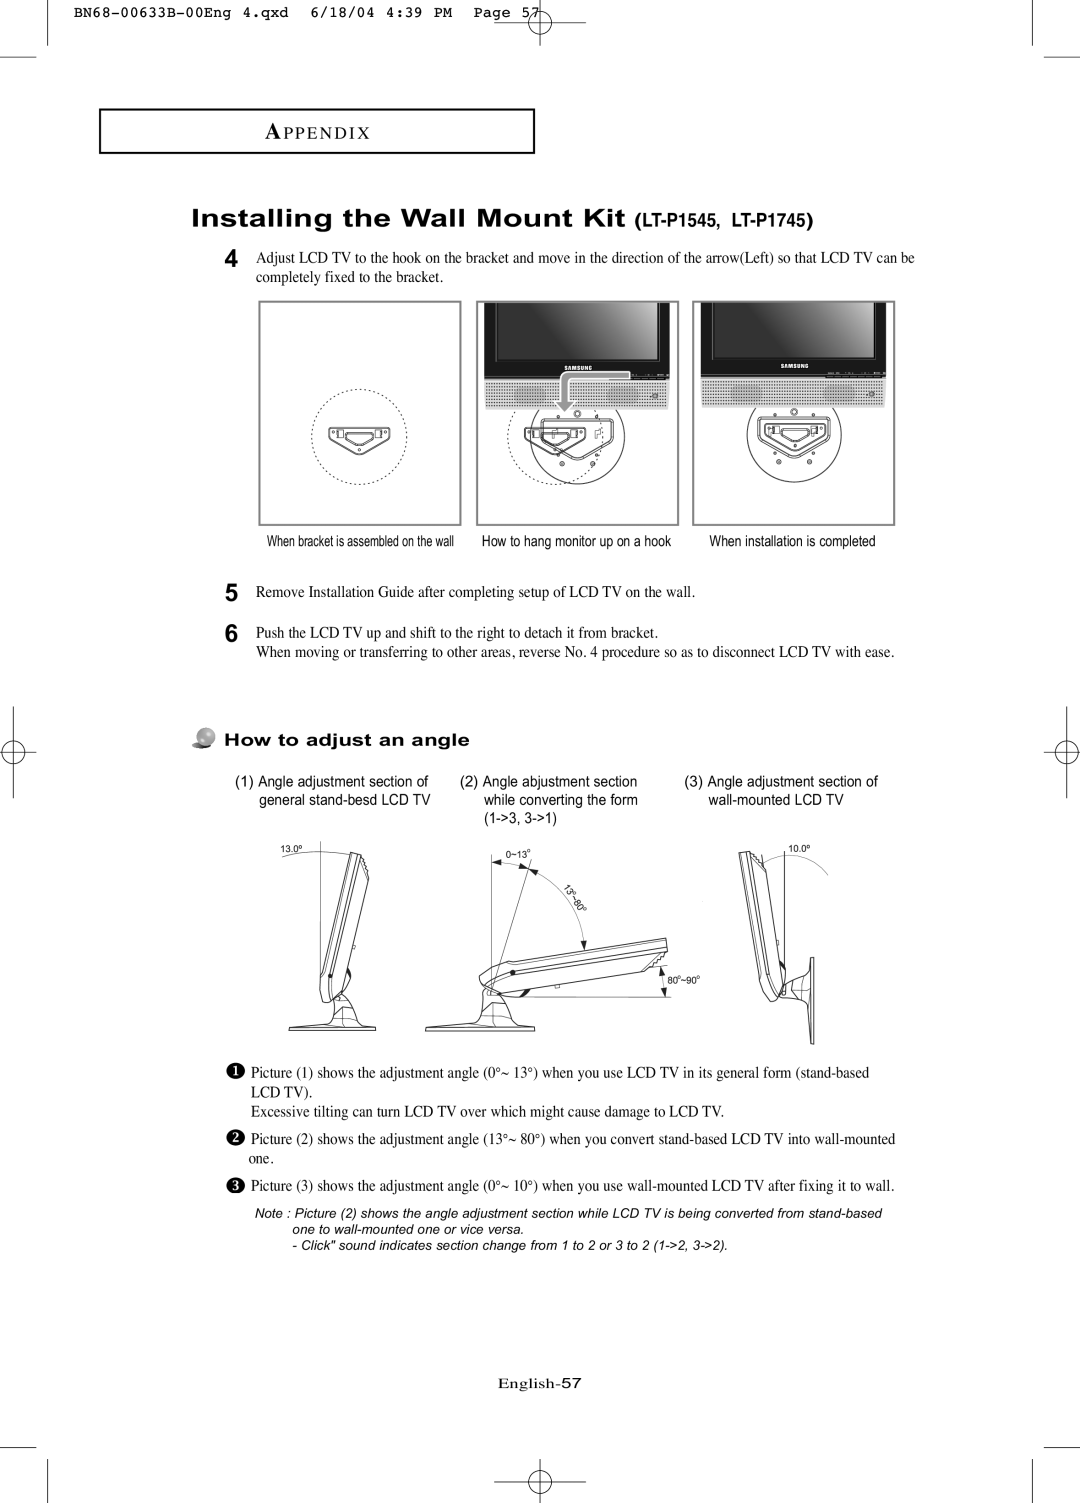 Samsung manual Installing the Wall Mount Kit LT-P1545, LT-P1745, A P P E N D I, How to adjust an angle 